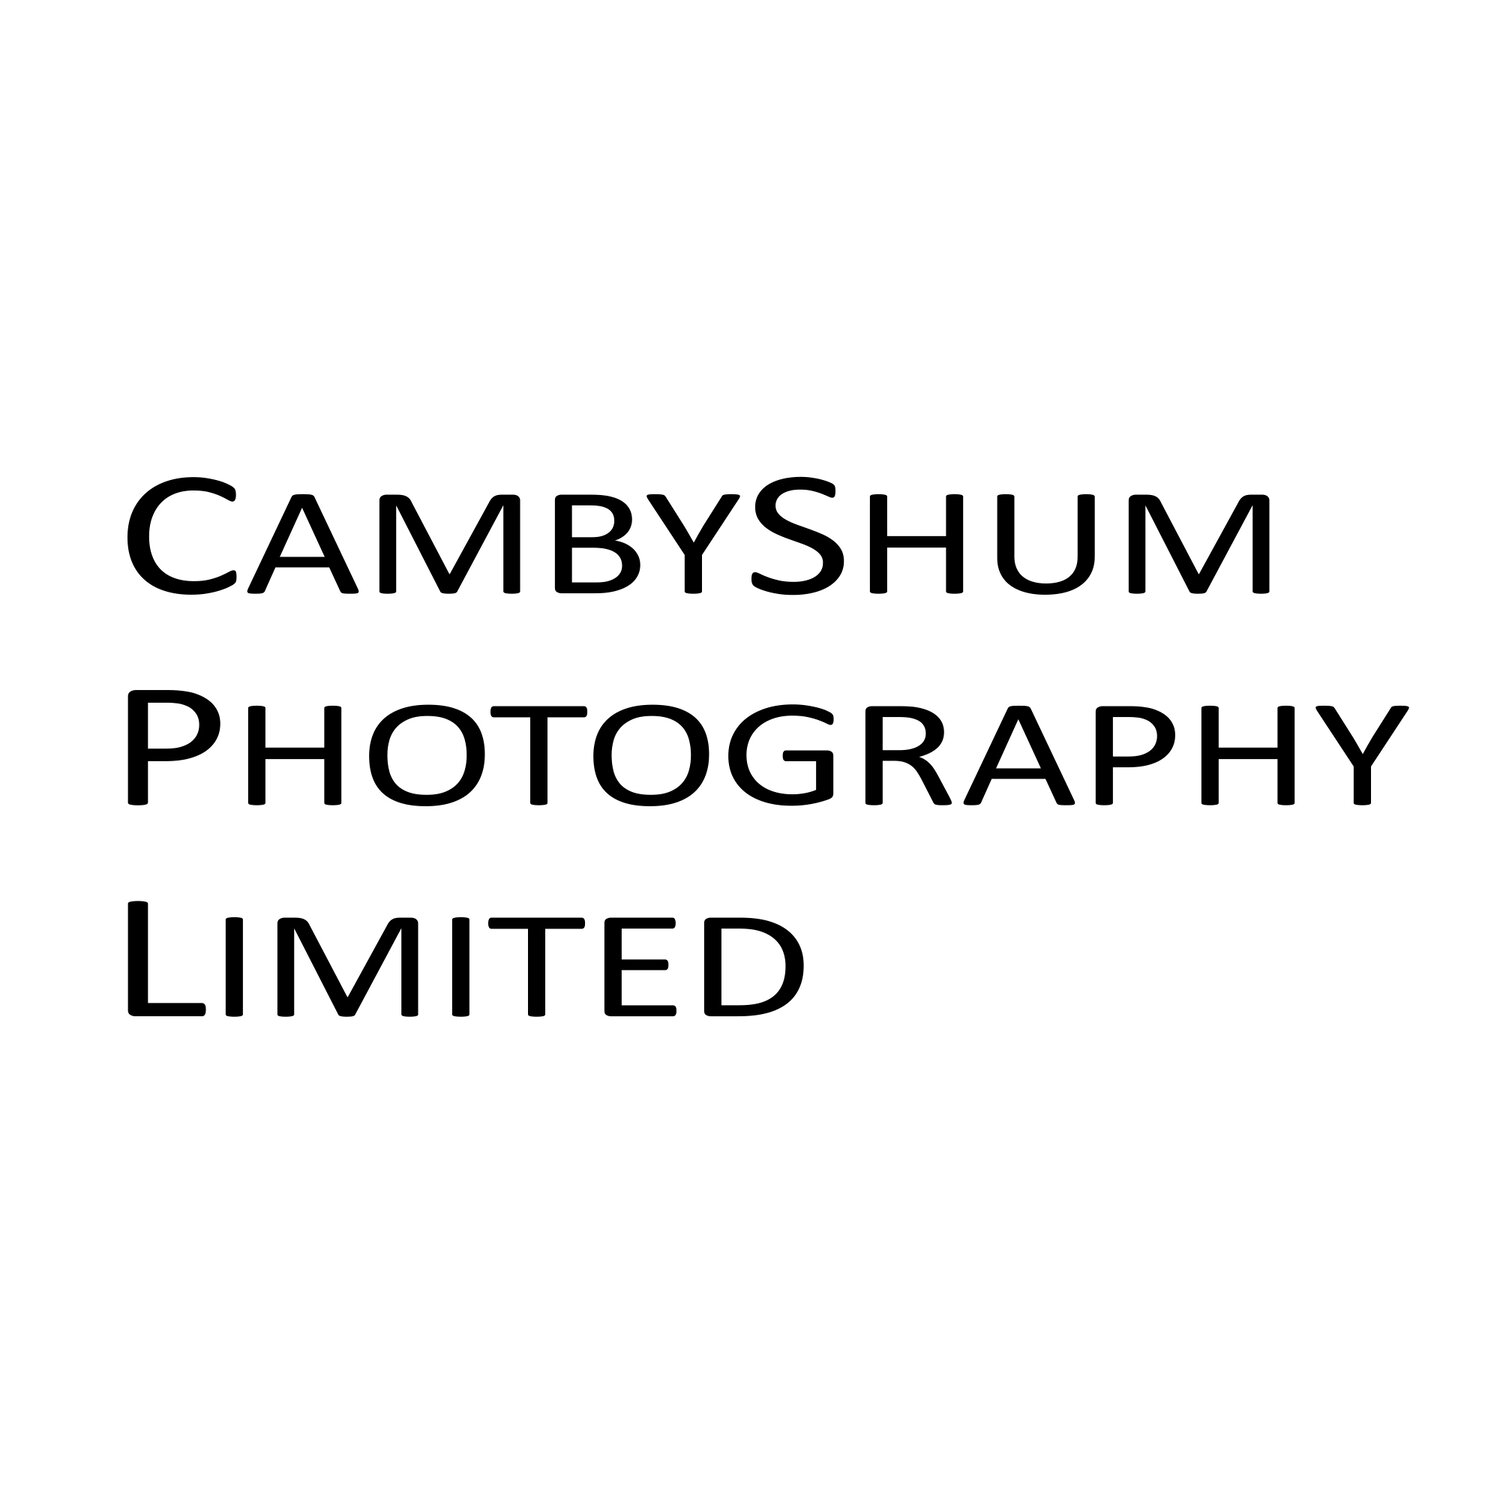 Camby Shum Photography Limited